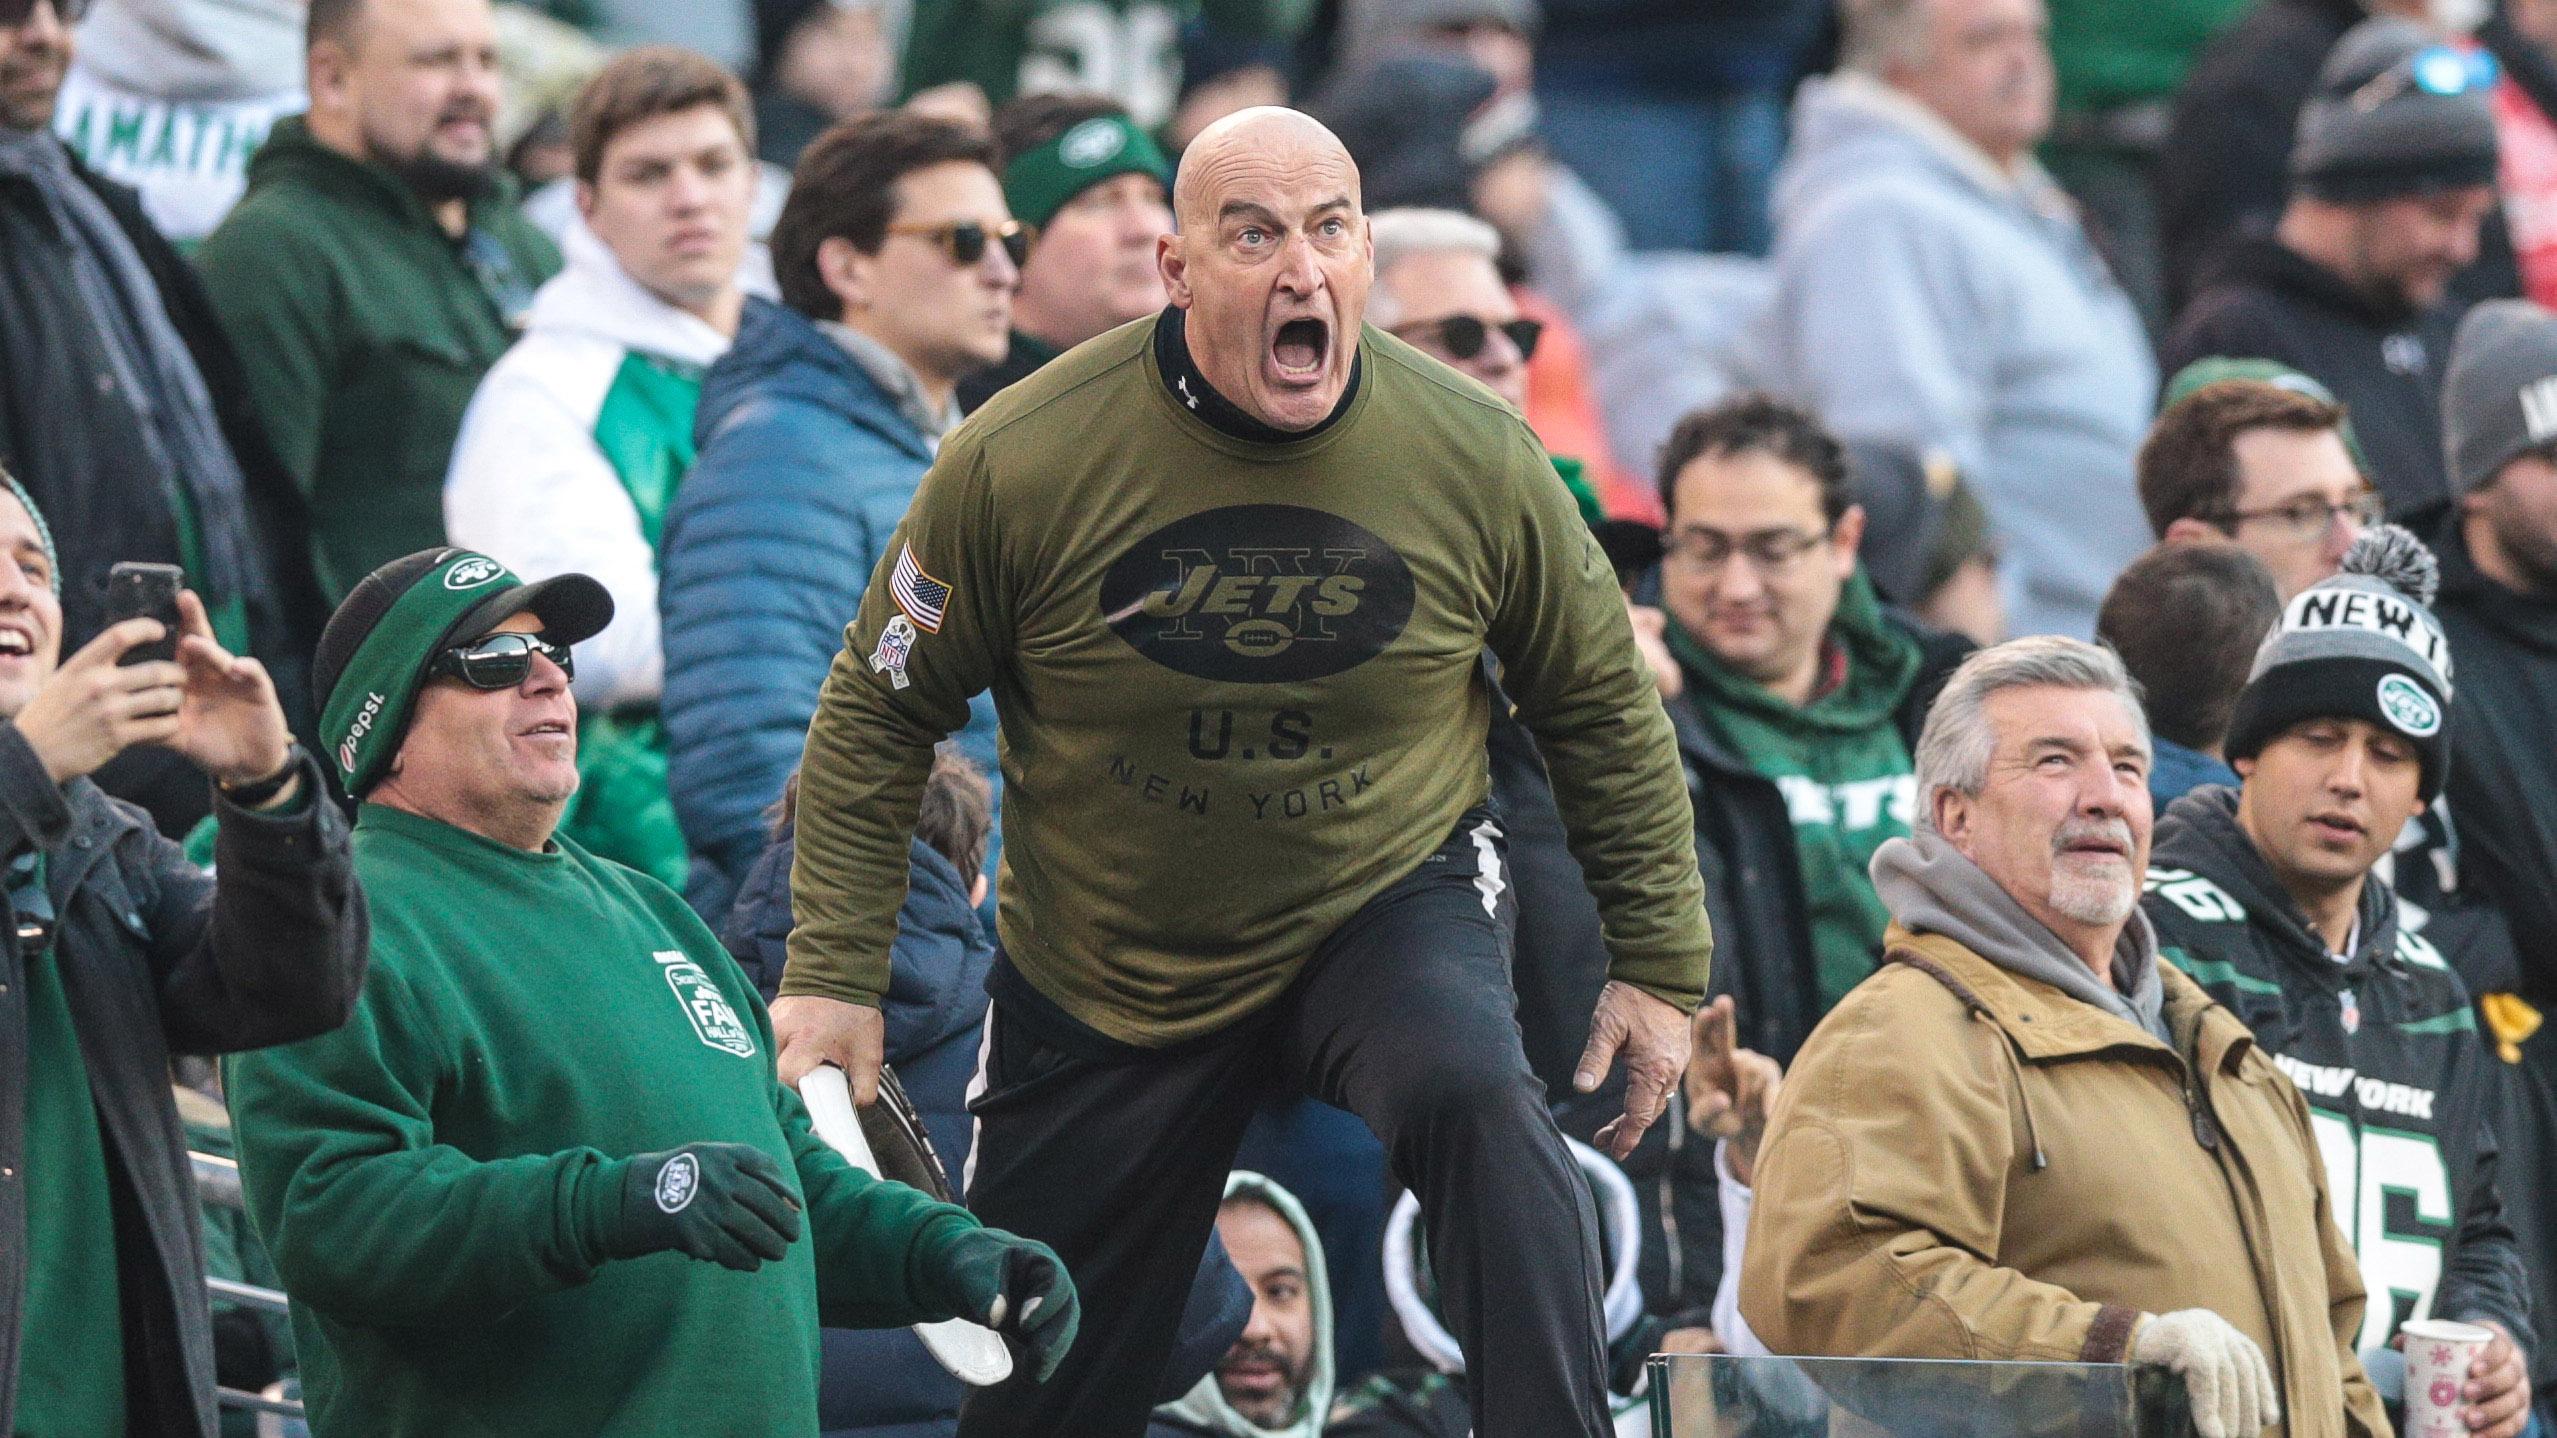 New York Jets fan Fireman Ed cheers during the second half of the game between the New York Jets and the Pittsburgh Steelers at MetLife Stadium. / Vincent Carchietta-USA TODAY Sports